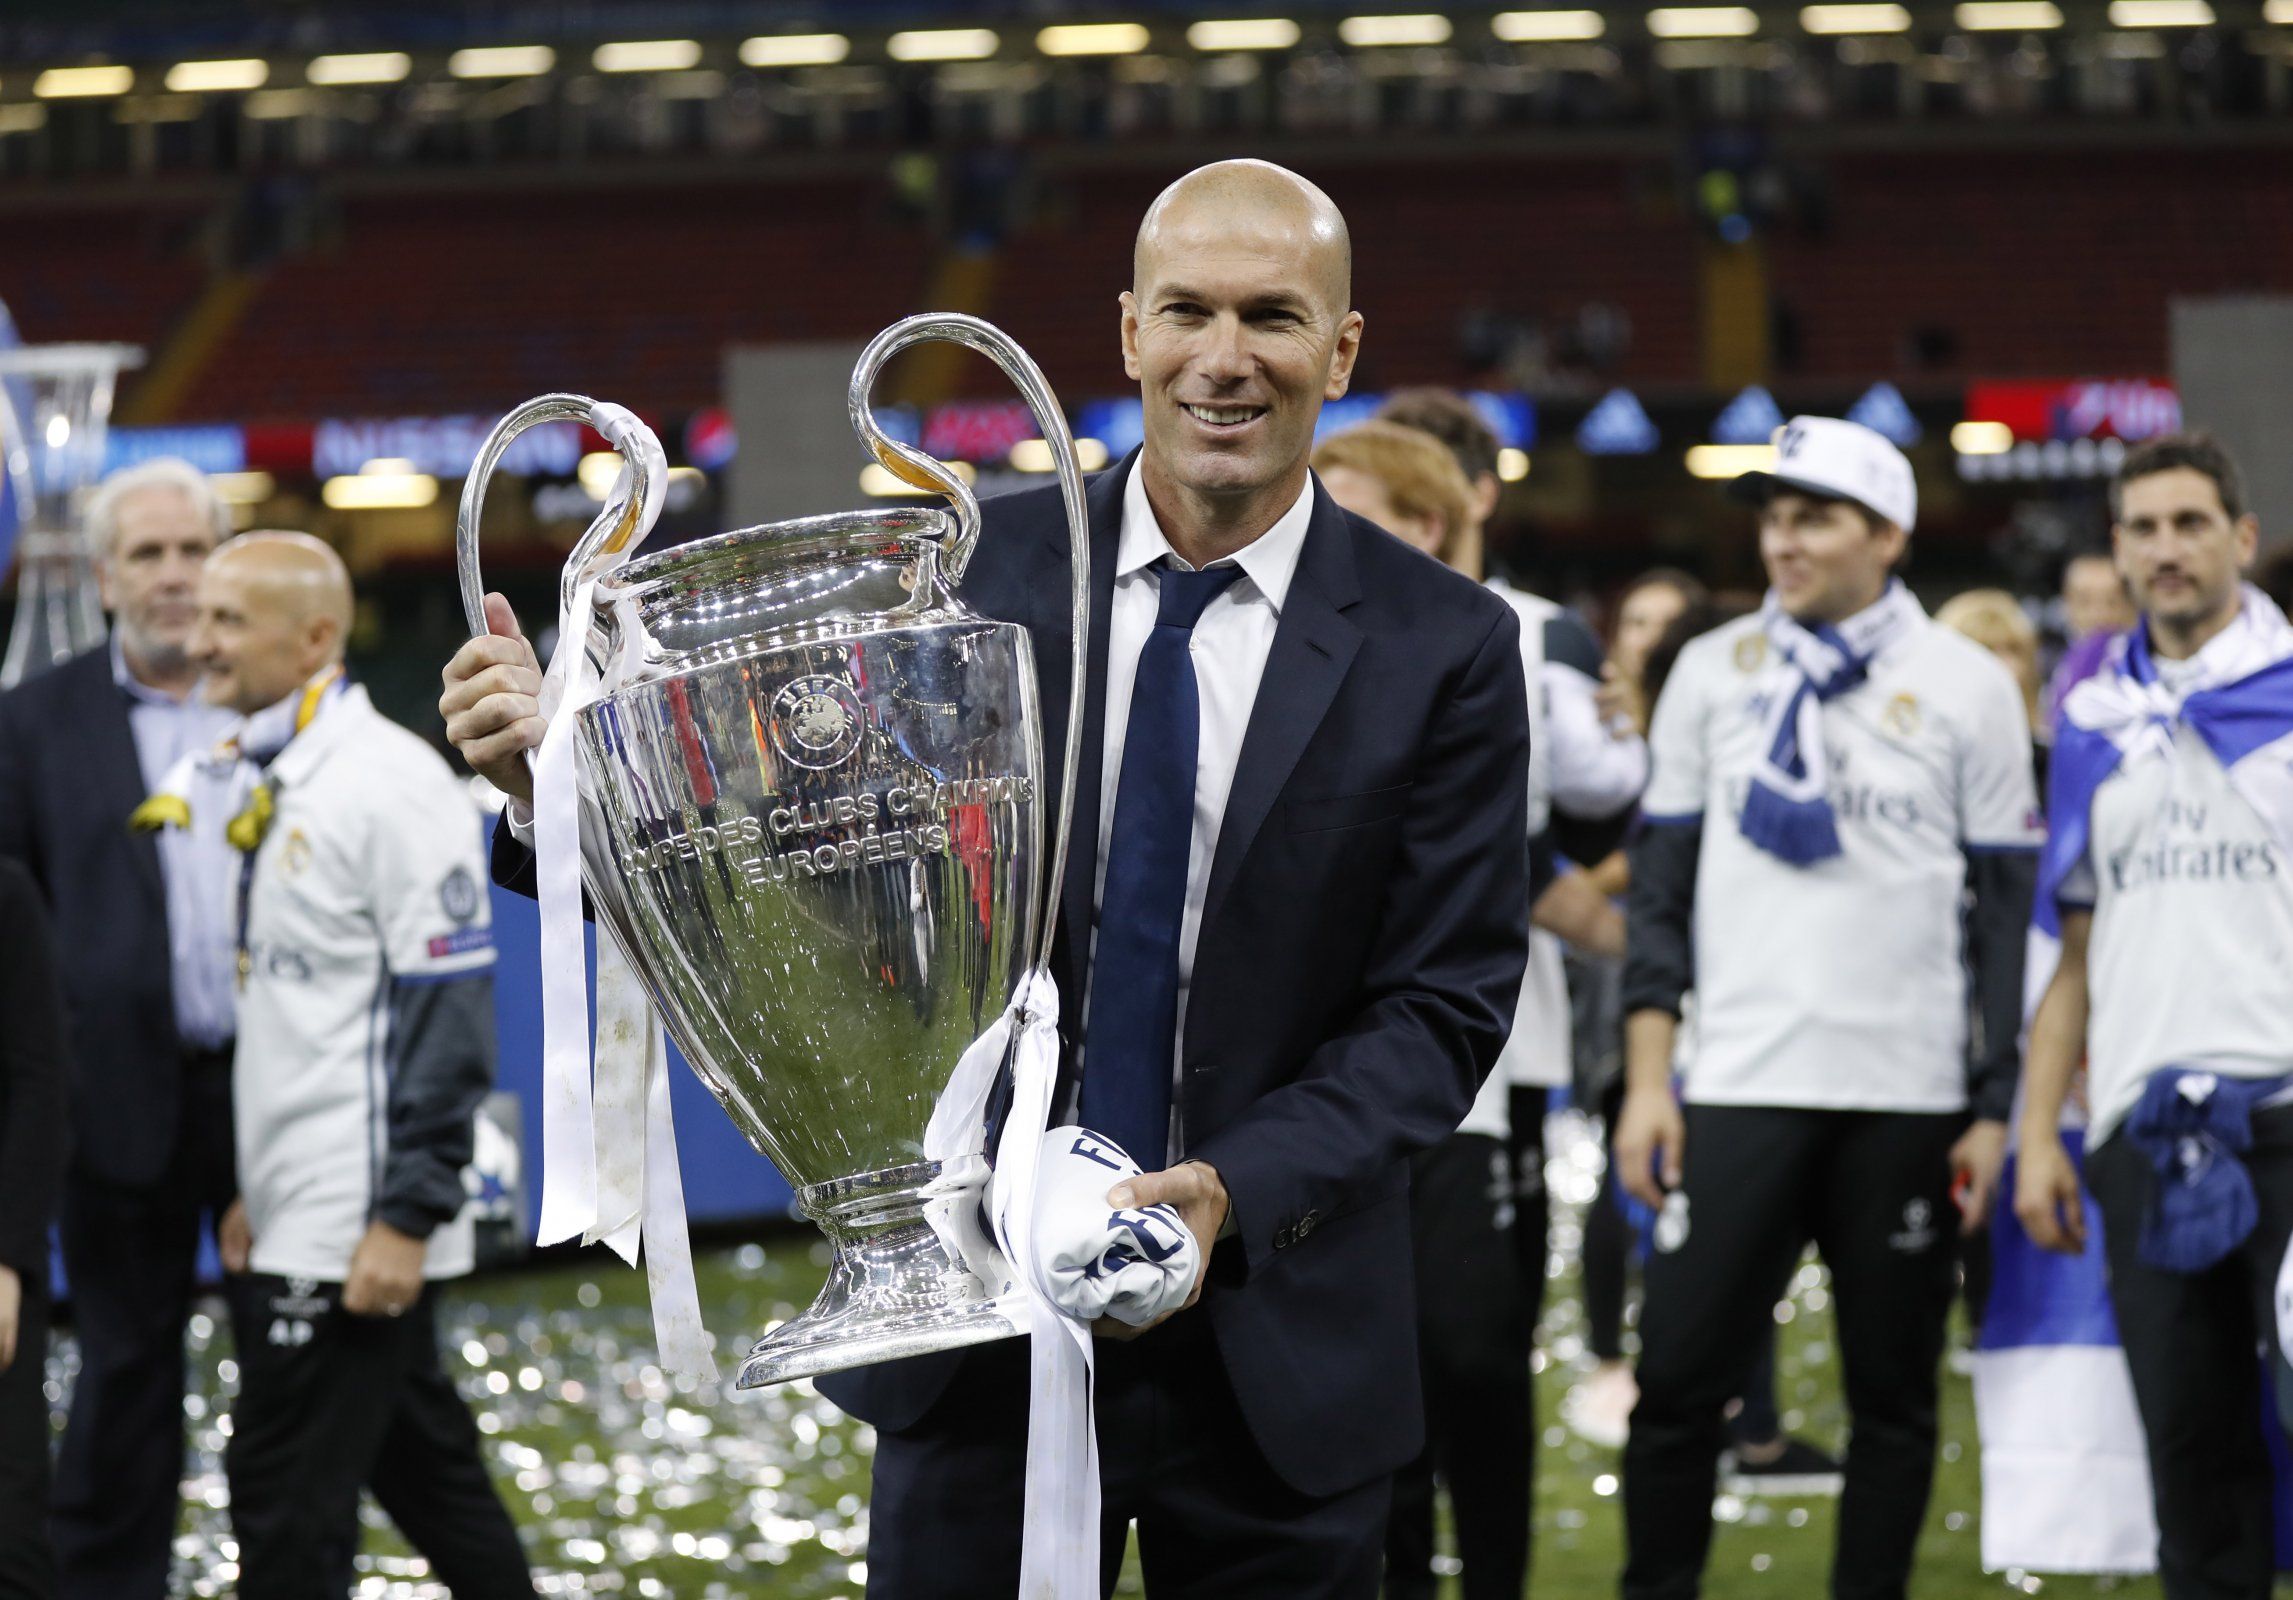 Zinedine Zidane poses with the Champions League trophy